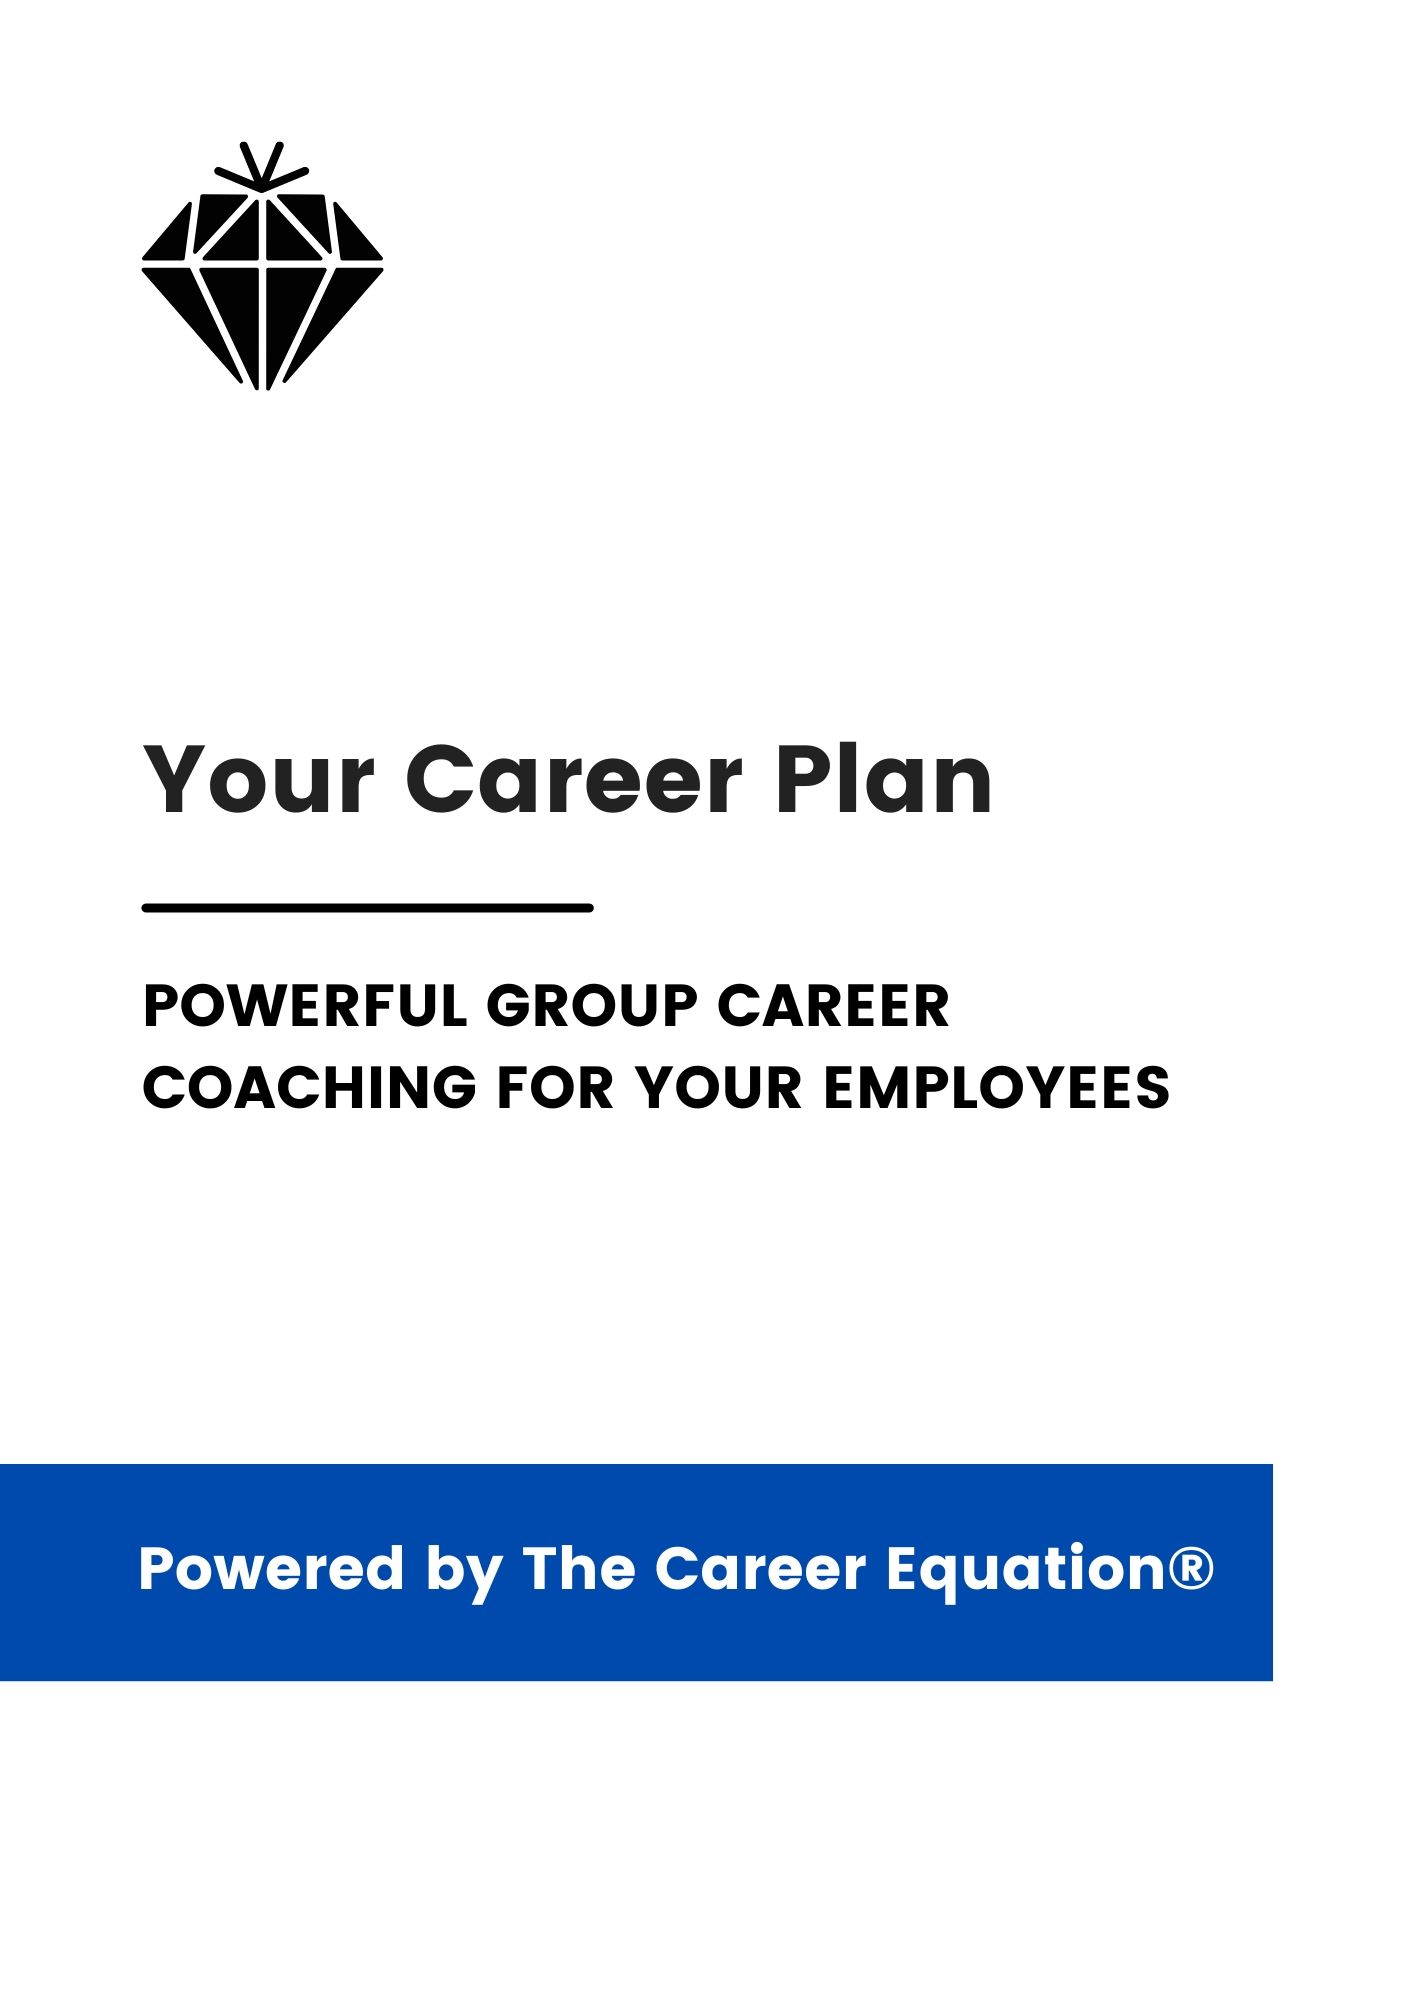 Your career plan powerful group career coaching for your employees is powered by the career equation.